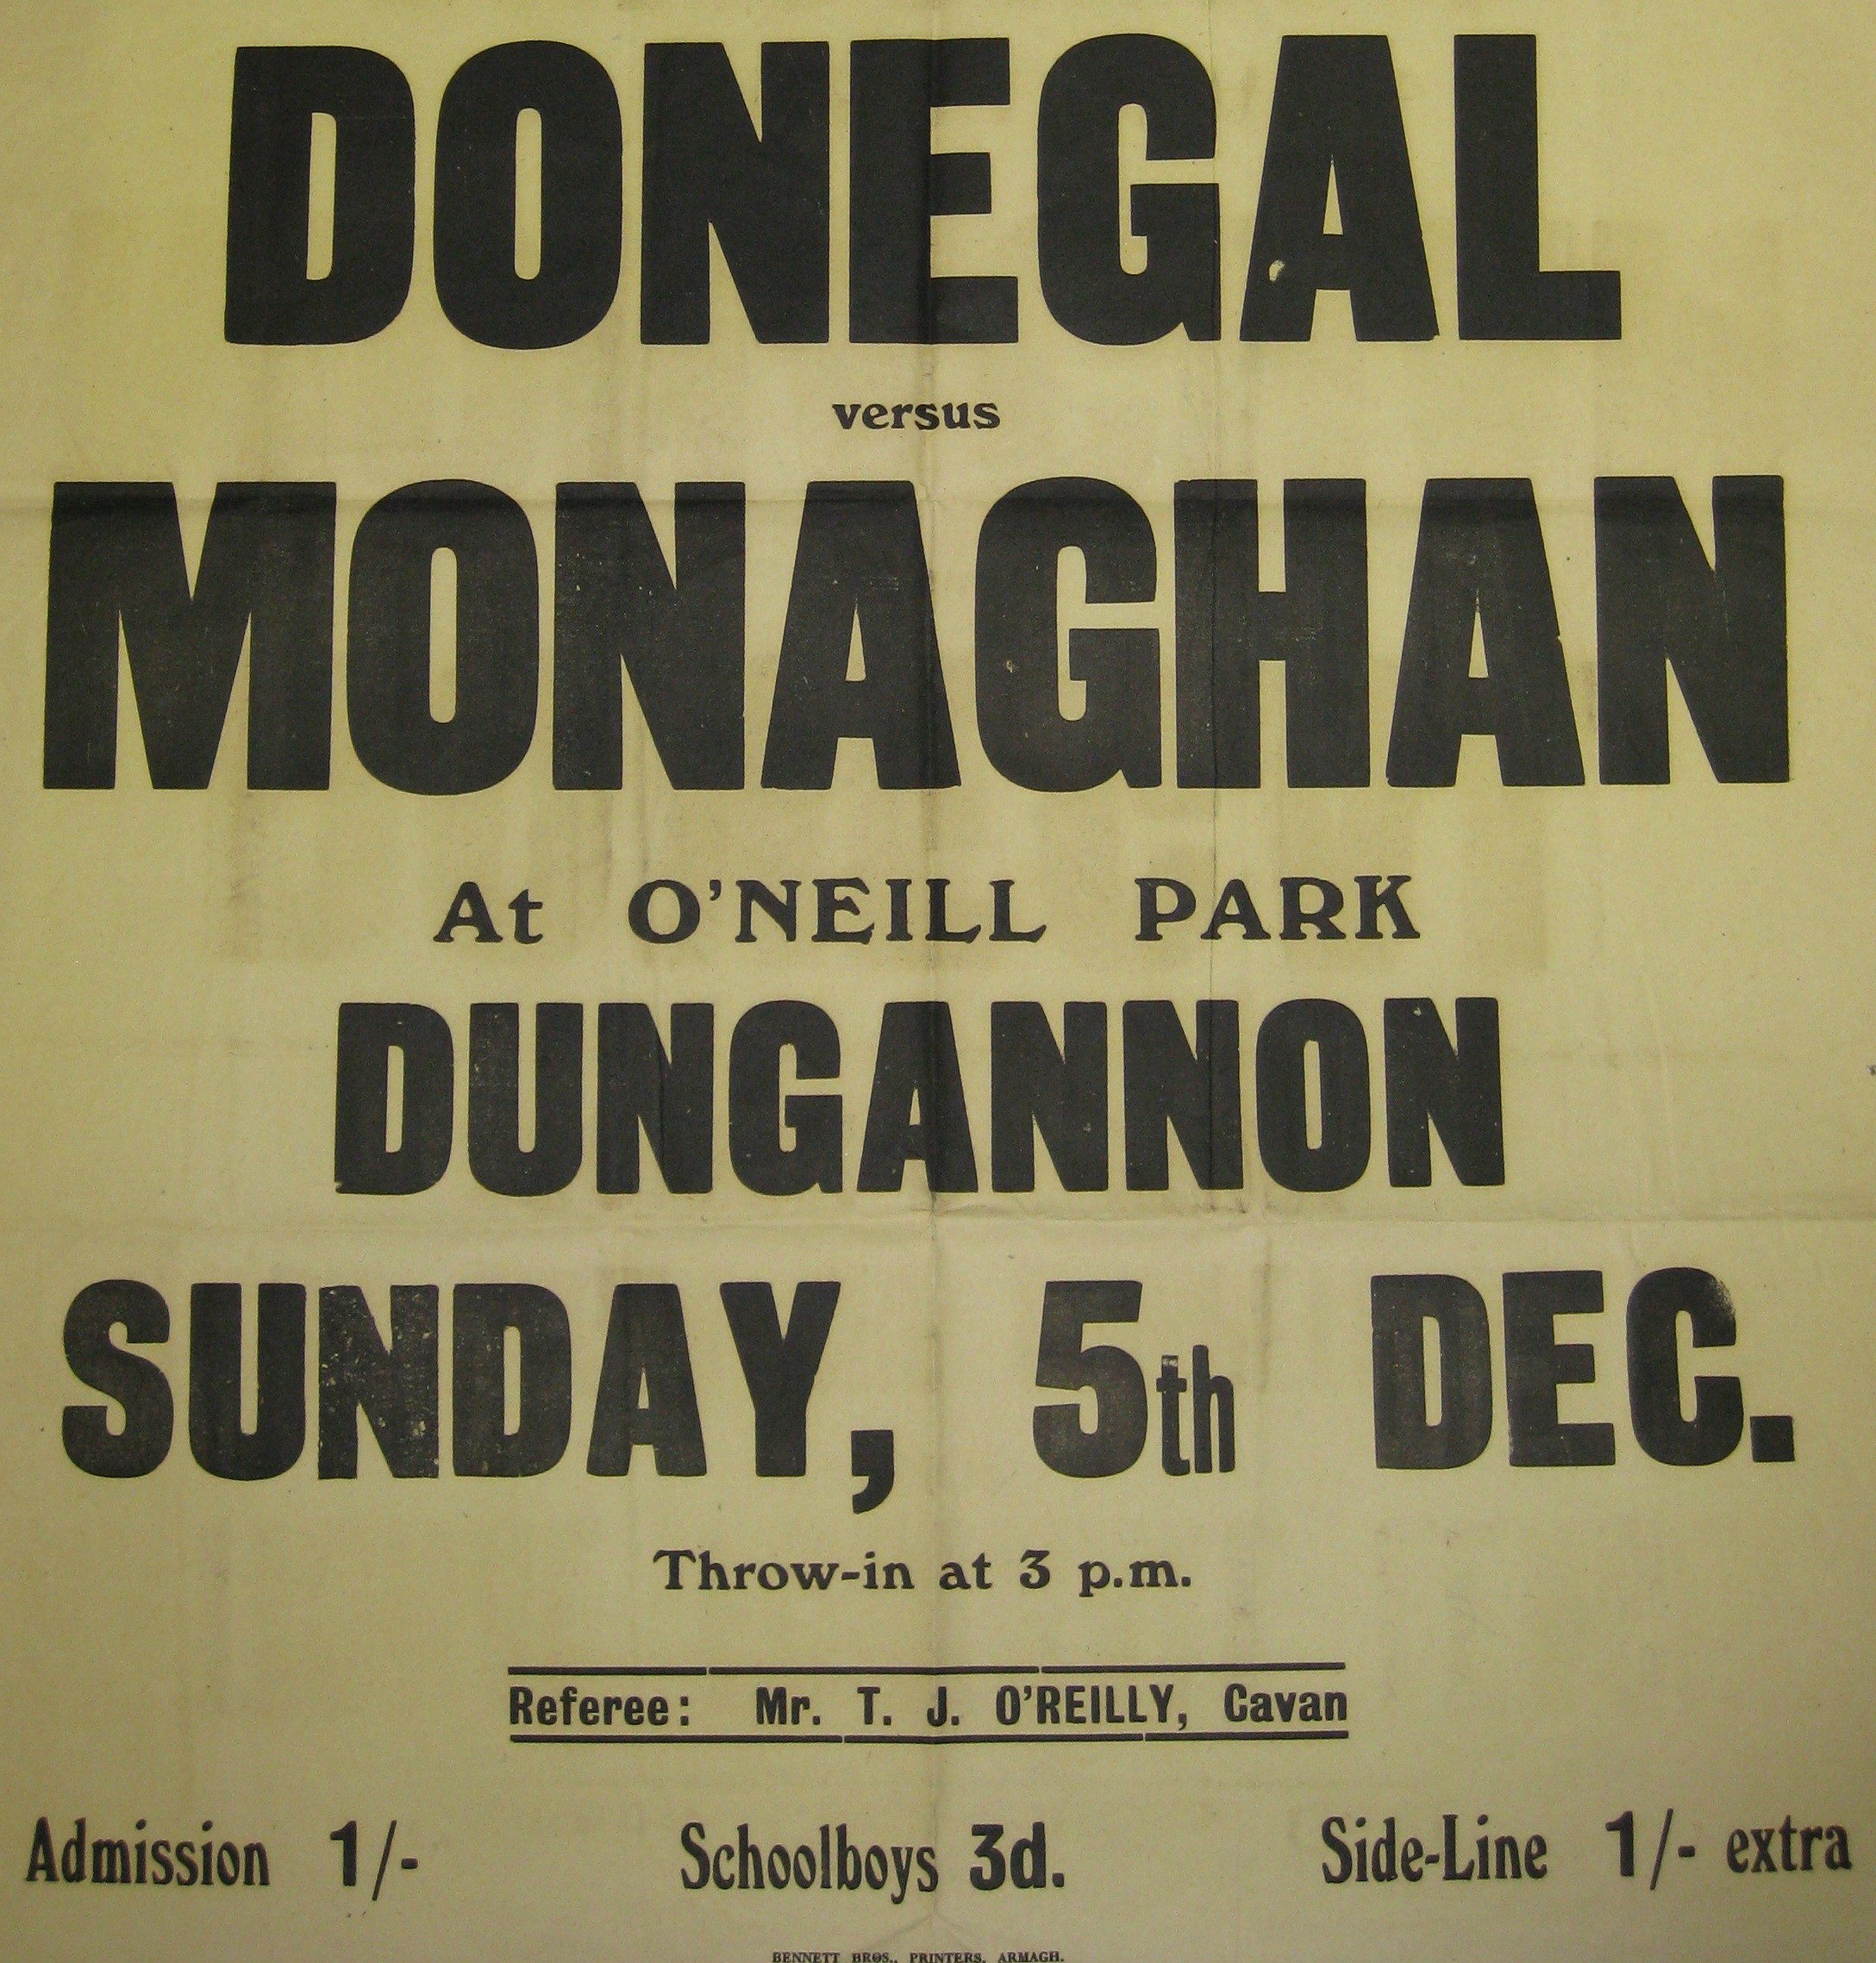 A poster advertising a National League match to be played in O'Neill Park, Dungannon. The special rate of entry for schoolboys at the gate suggests that the GAA were aware of the importance of getting children involved in GAA activities from an early age.